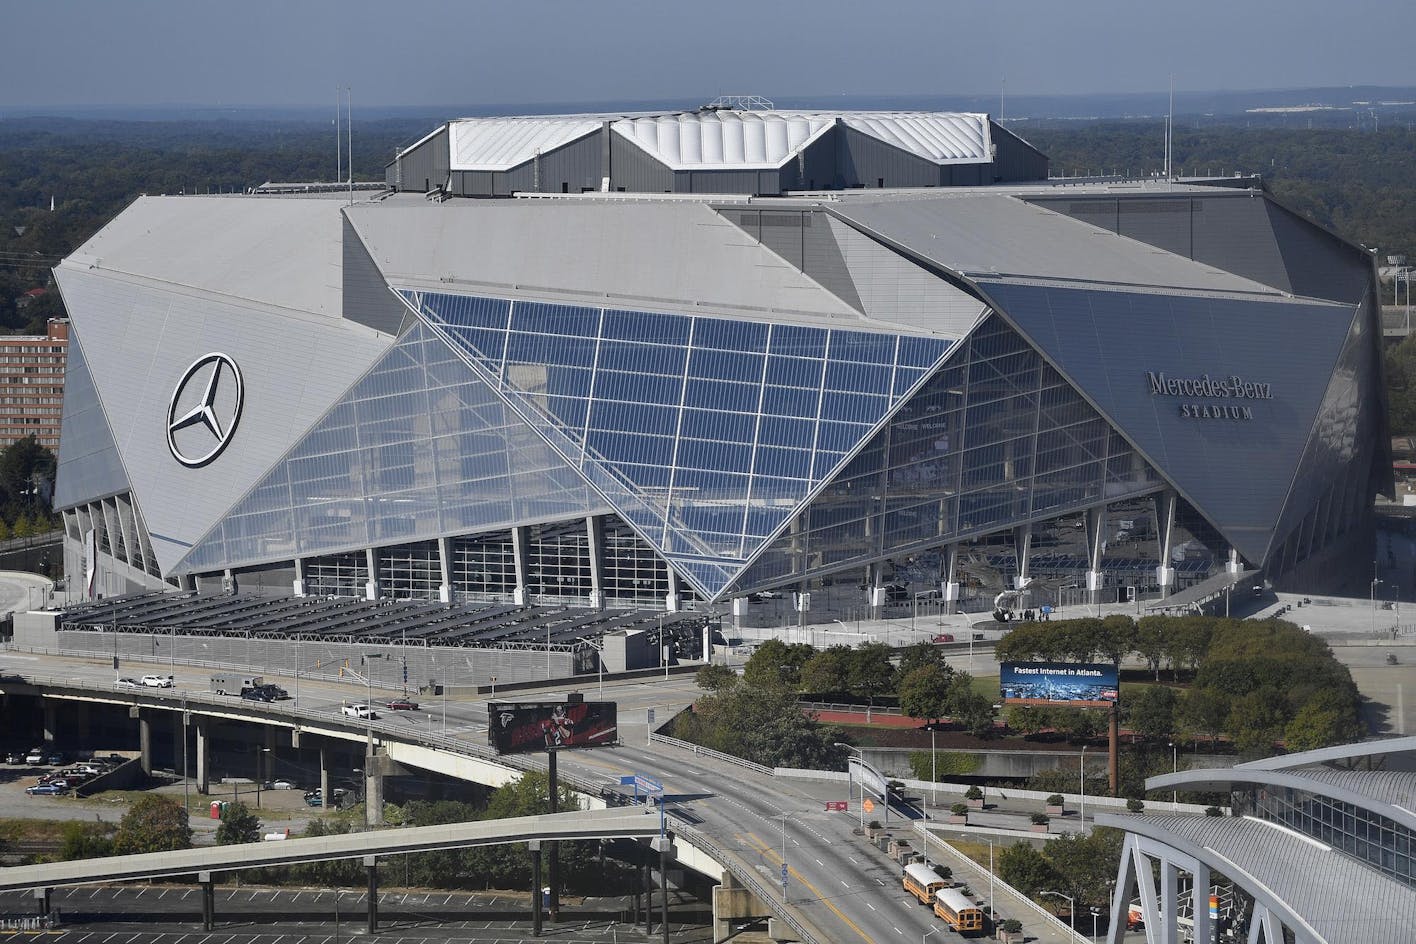 NanaWall opening glass system in Mercedes-Benz Stadium